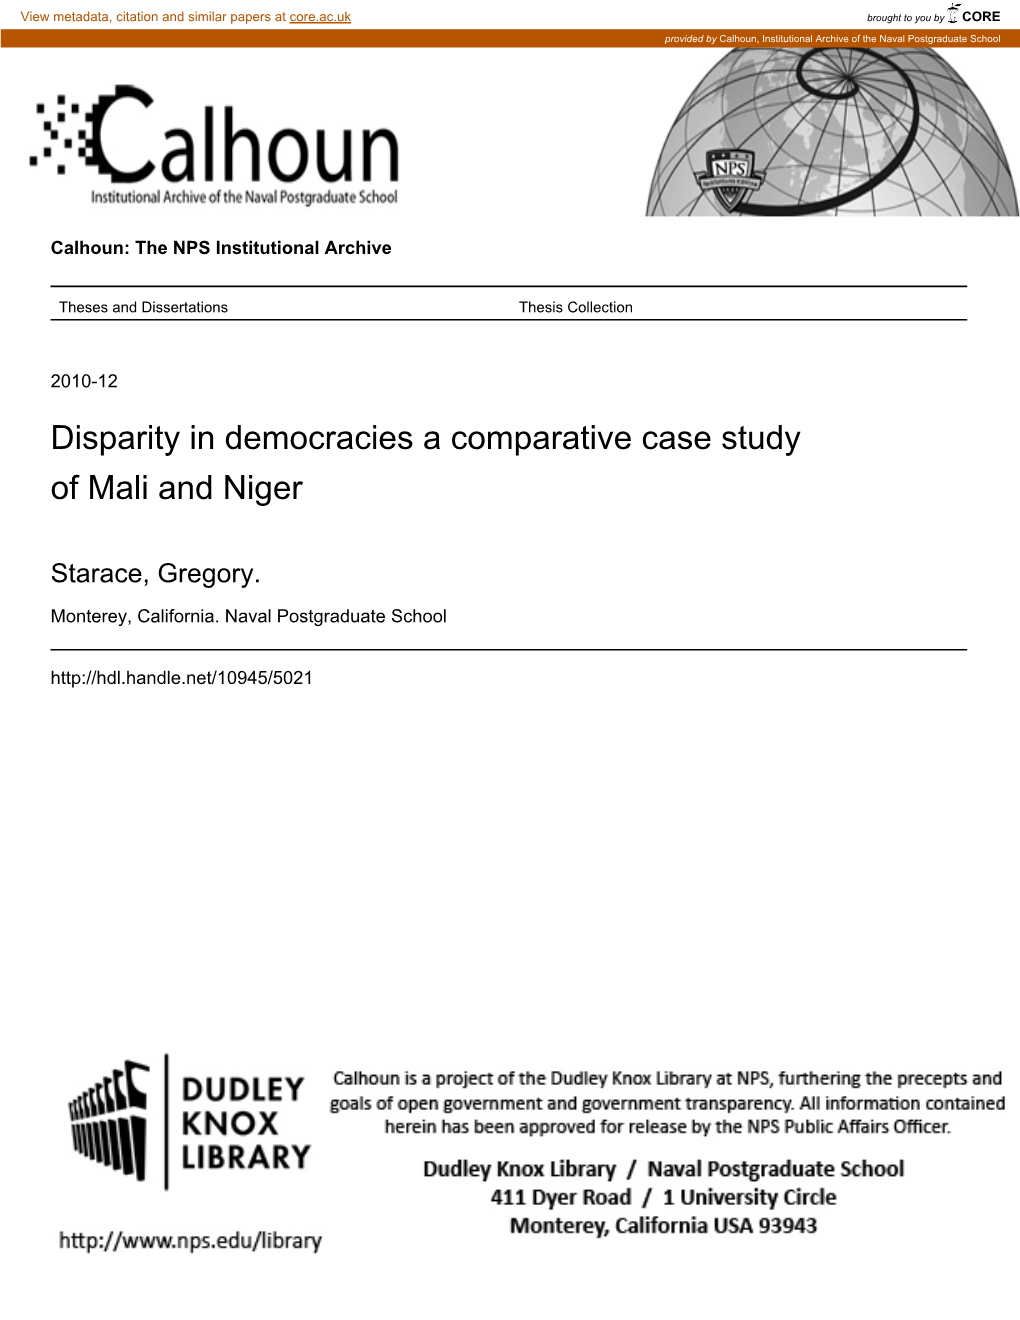 Disparity in Democracies a Comparative Case Study of Mali and Niger